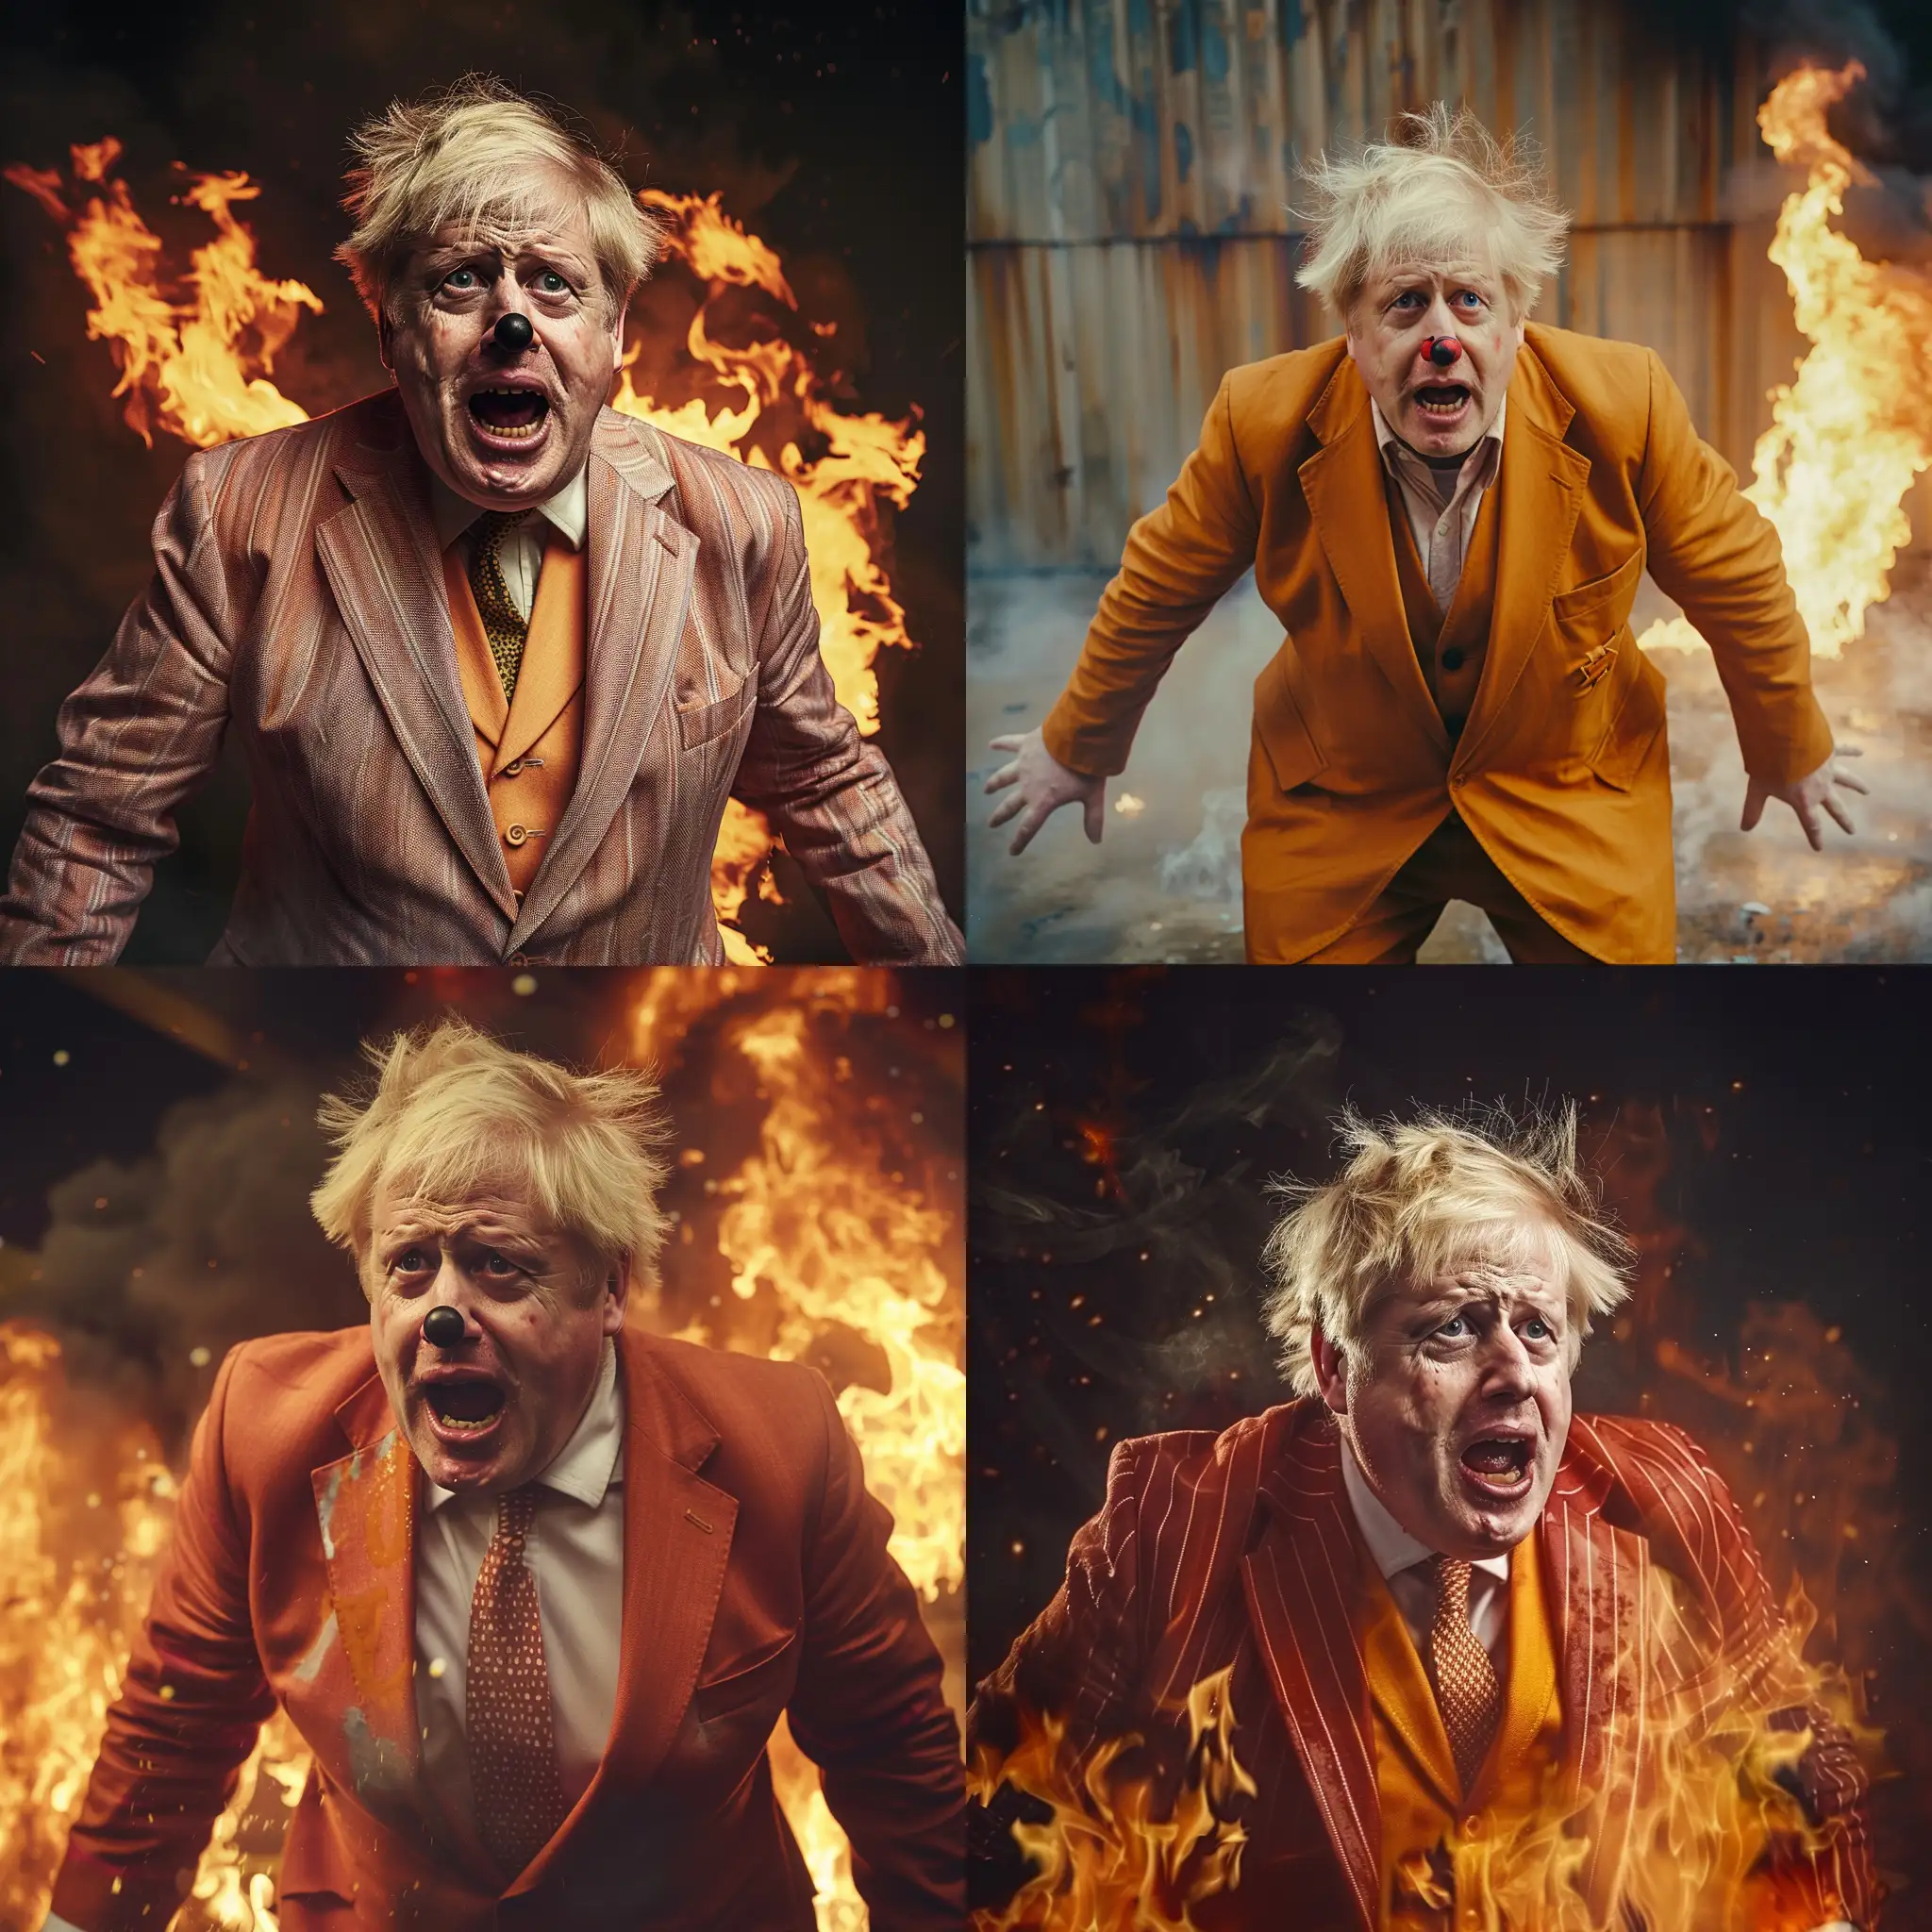 Boris Johnson in a clown suit, looking panicked while on fire